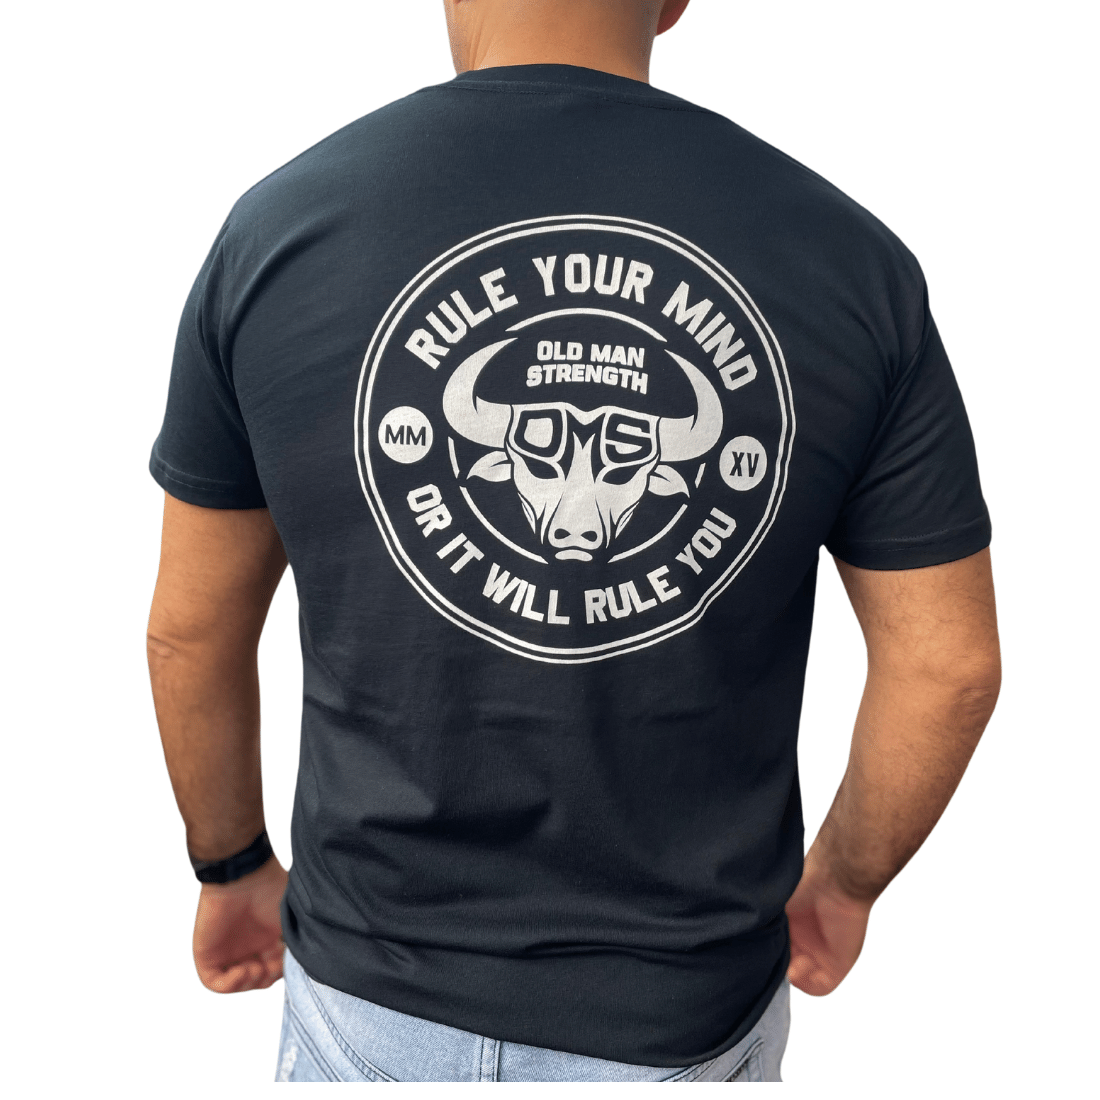 RULE YOUR MIND, OLD MAN STRENGTH, BULL SHIRT, Old Men Strength Training Tshirt, Mens Black Tshirt, Bull Tshirt, Mens Gym Shirts, Fitness shirt, Mens Tee, Navy shirt